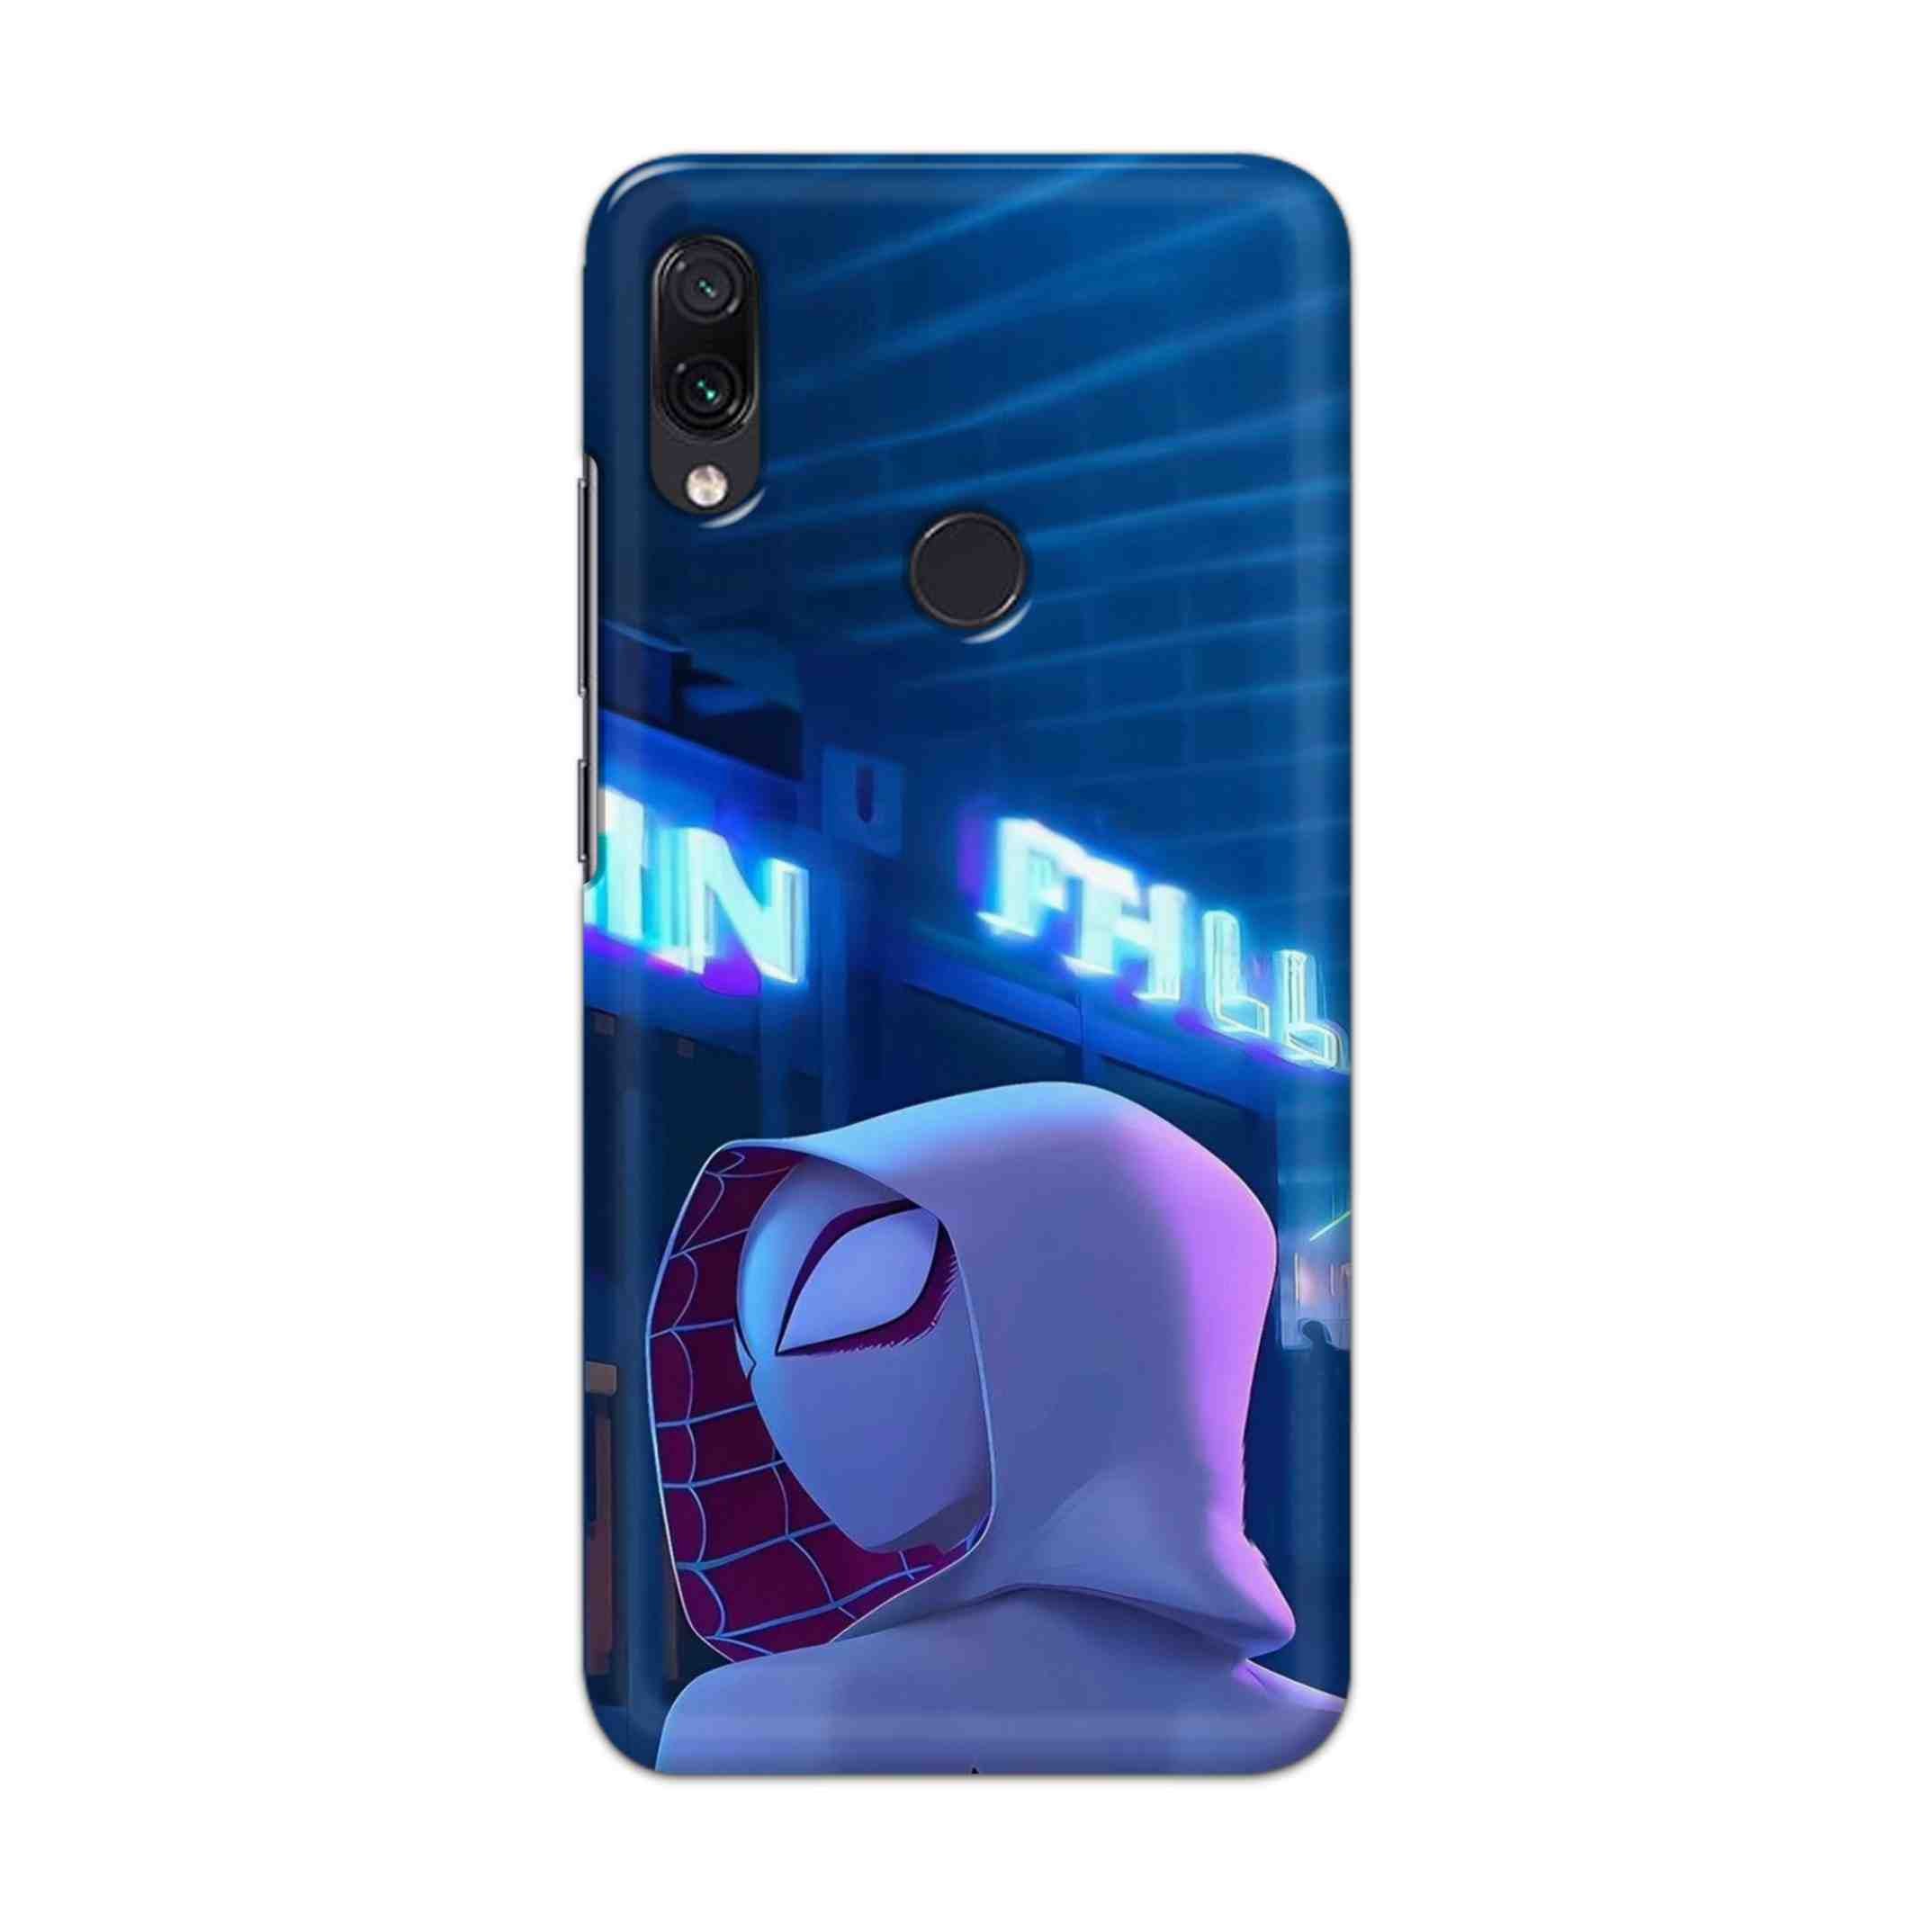 Buy Spiderman Girl Hard Back Mobile Phone Case Cover For Redmi Note 7 / Note 7 Pro Online